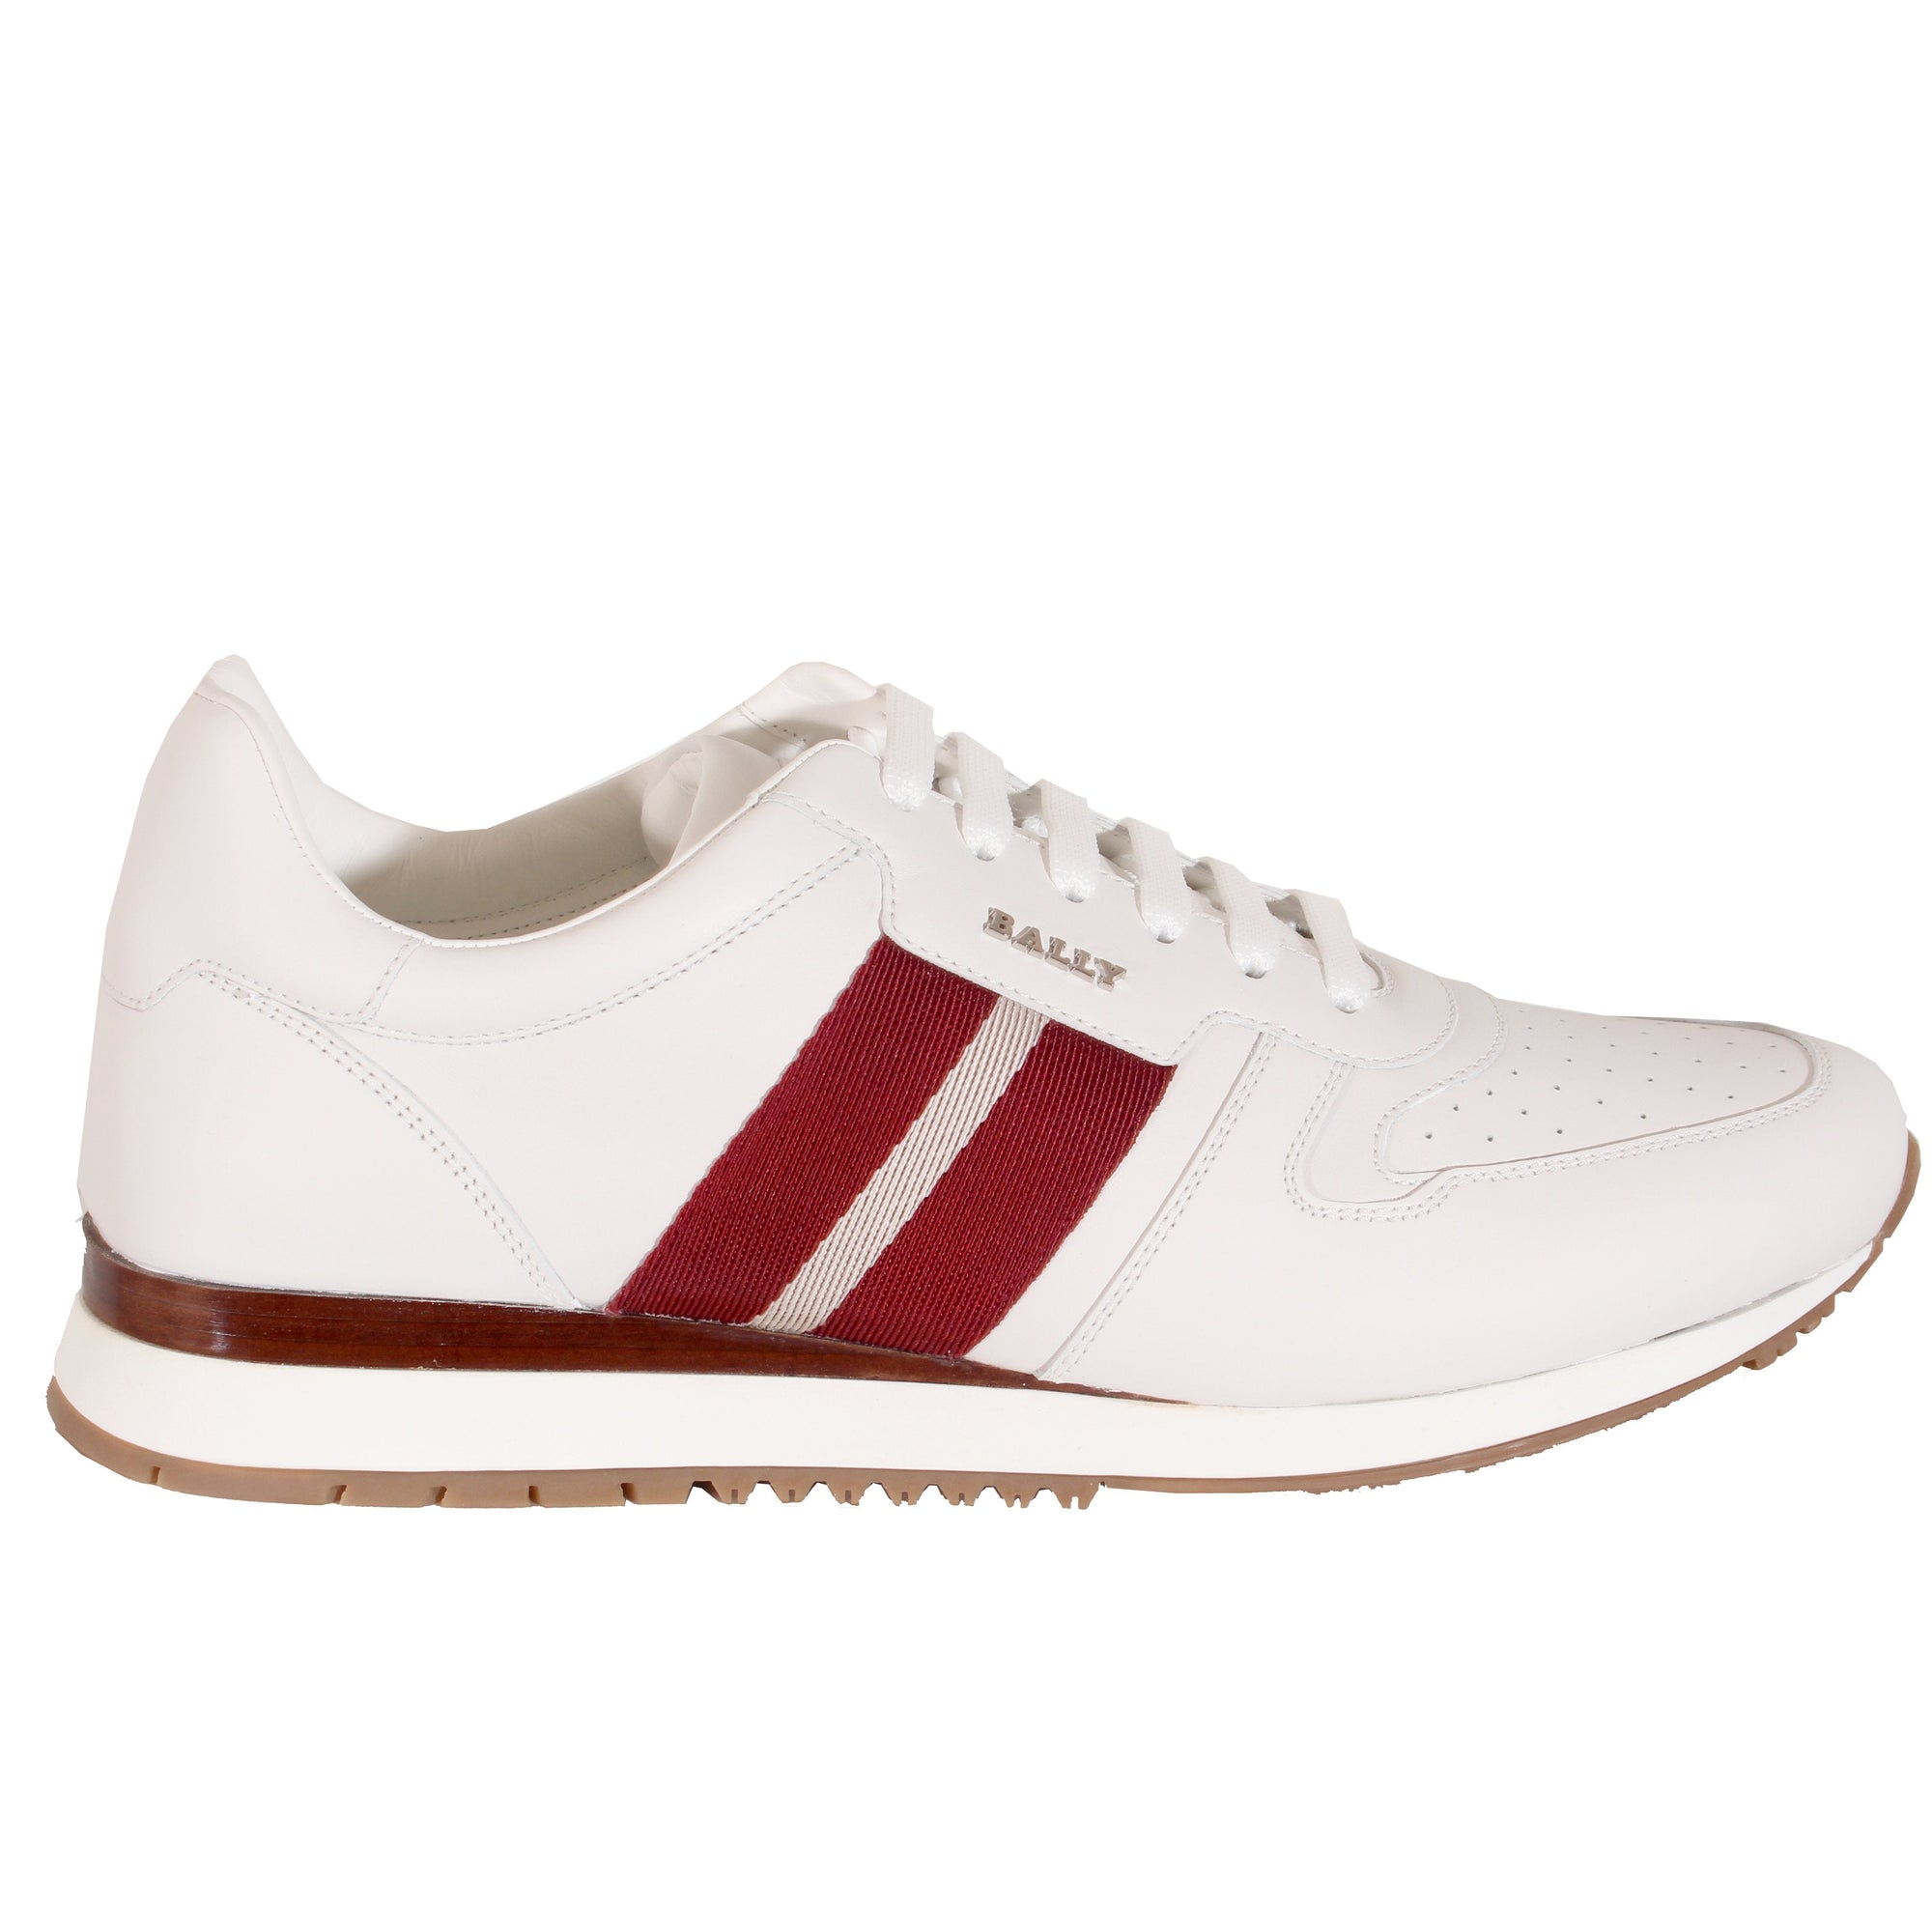 Men's Astel Leather Sneakers in White